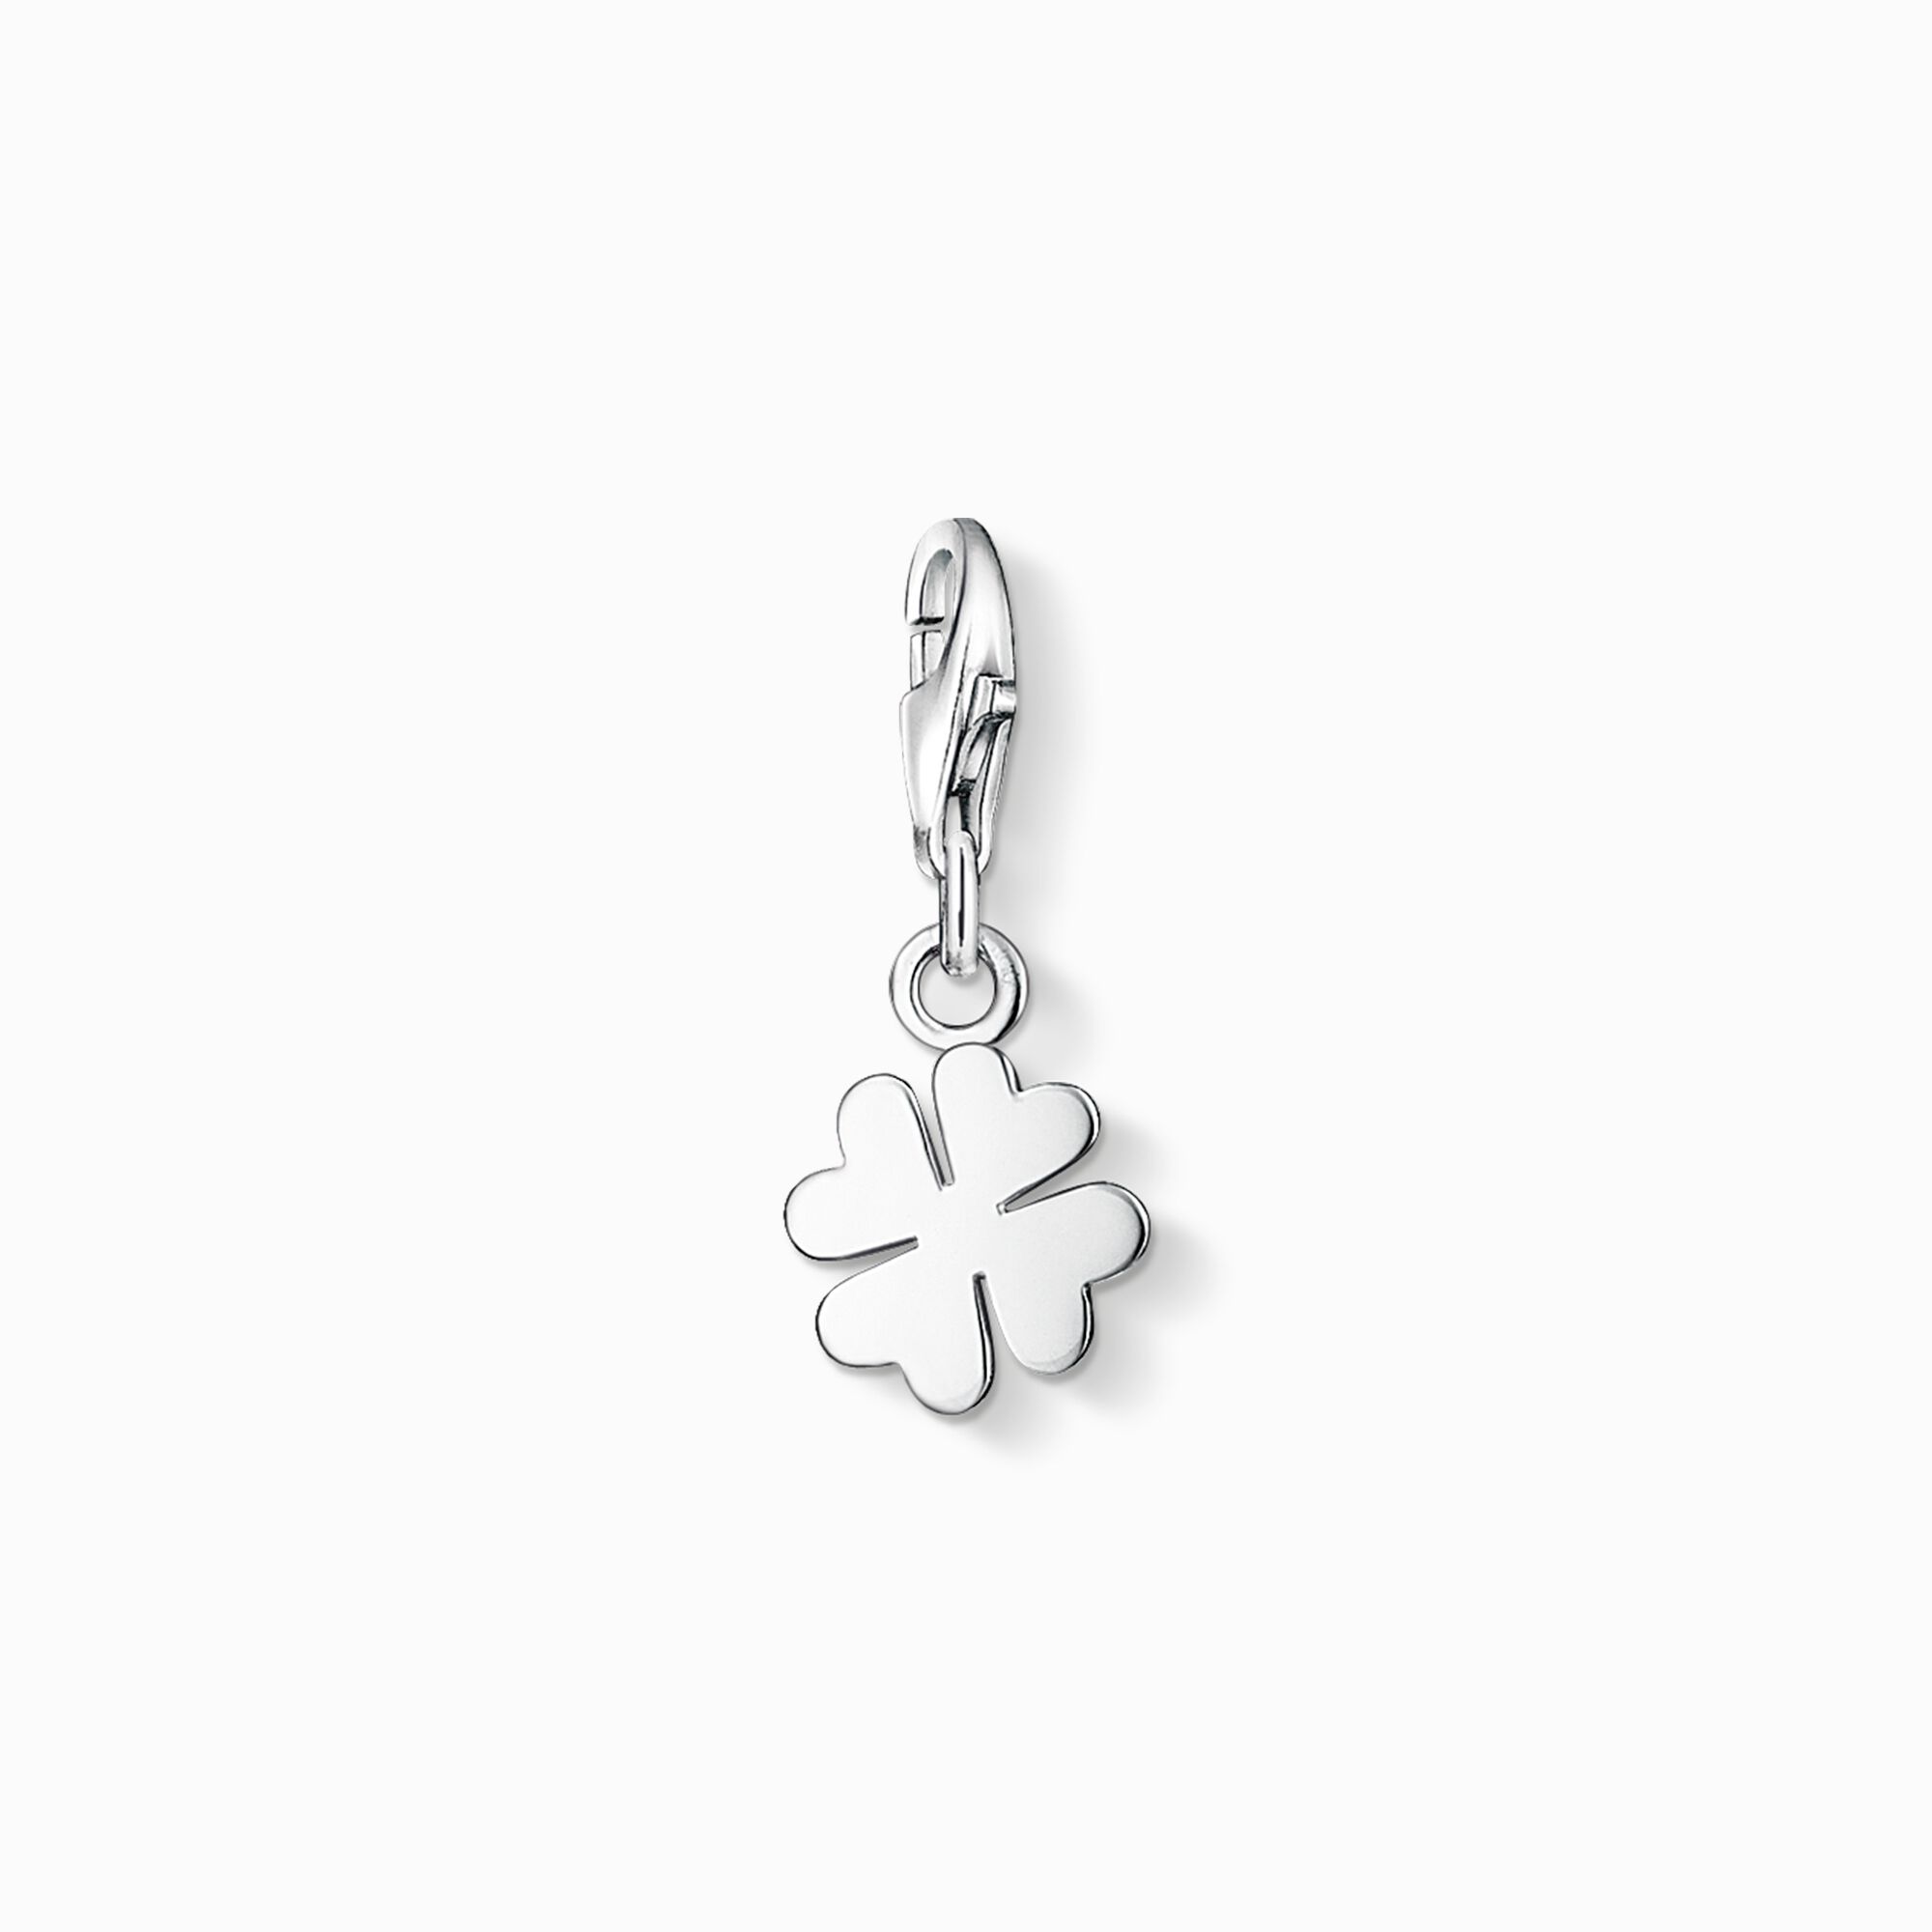 Charm pendant cloverleaf from the Charm Club collection in the THOMAS SABO online store